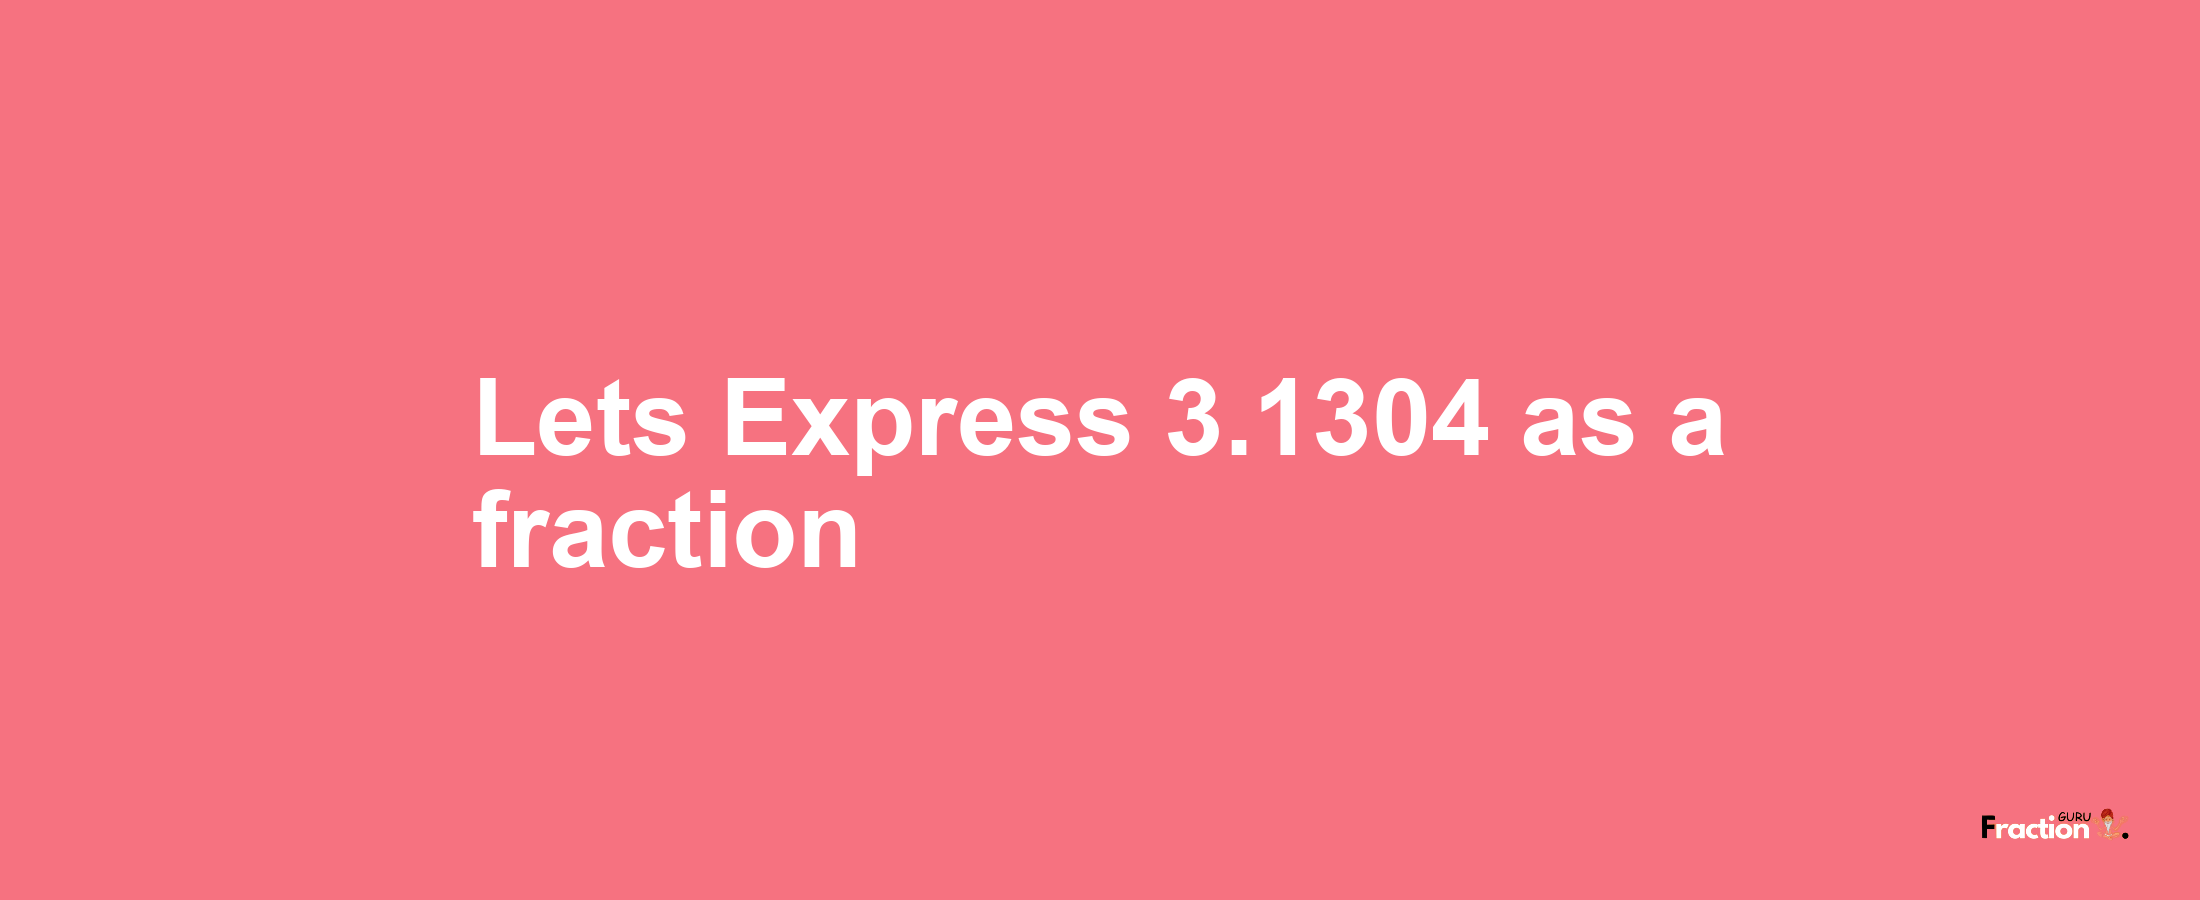 Lets Express 3.1304 as afraction